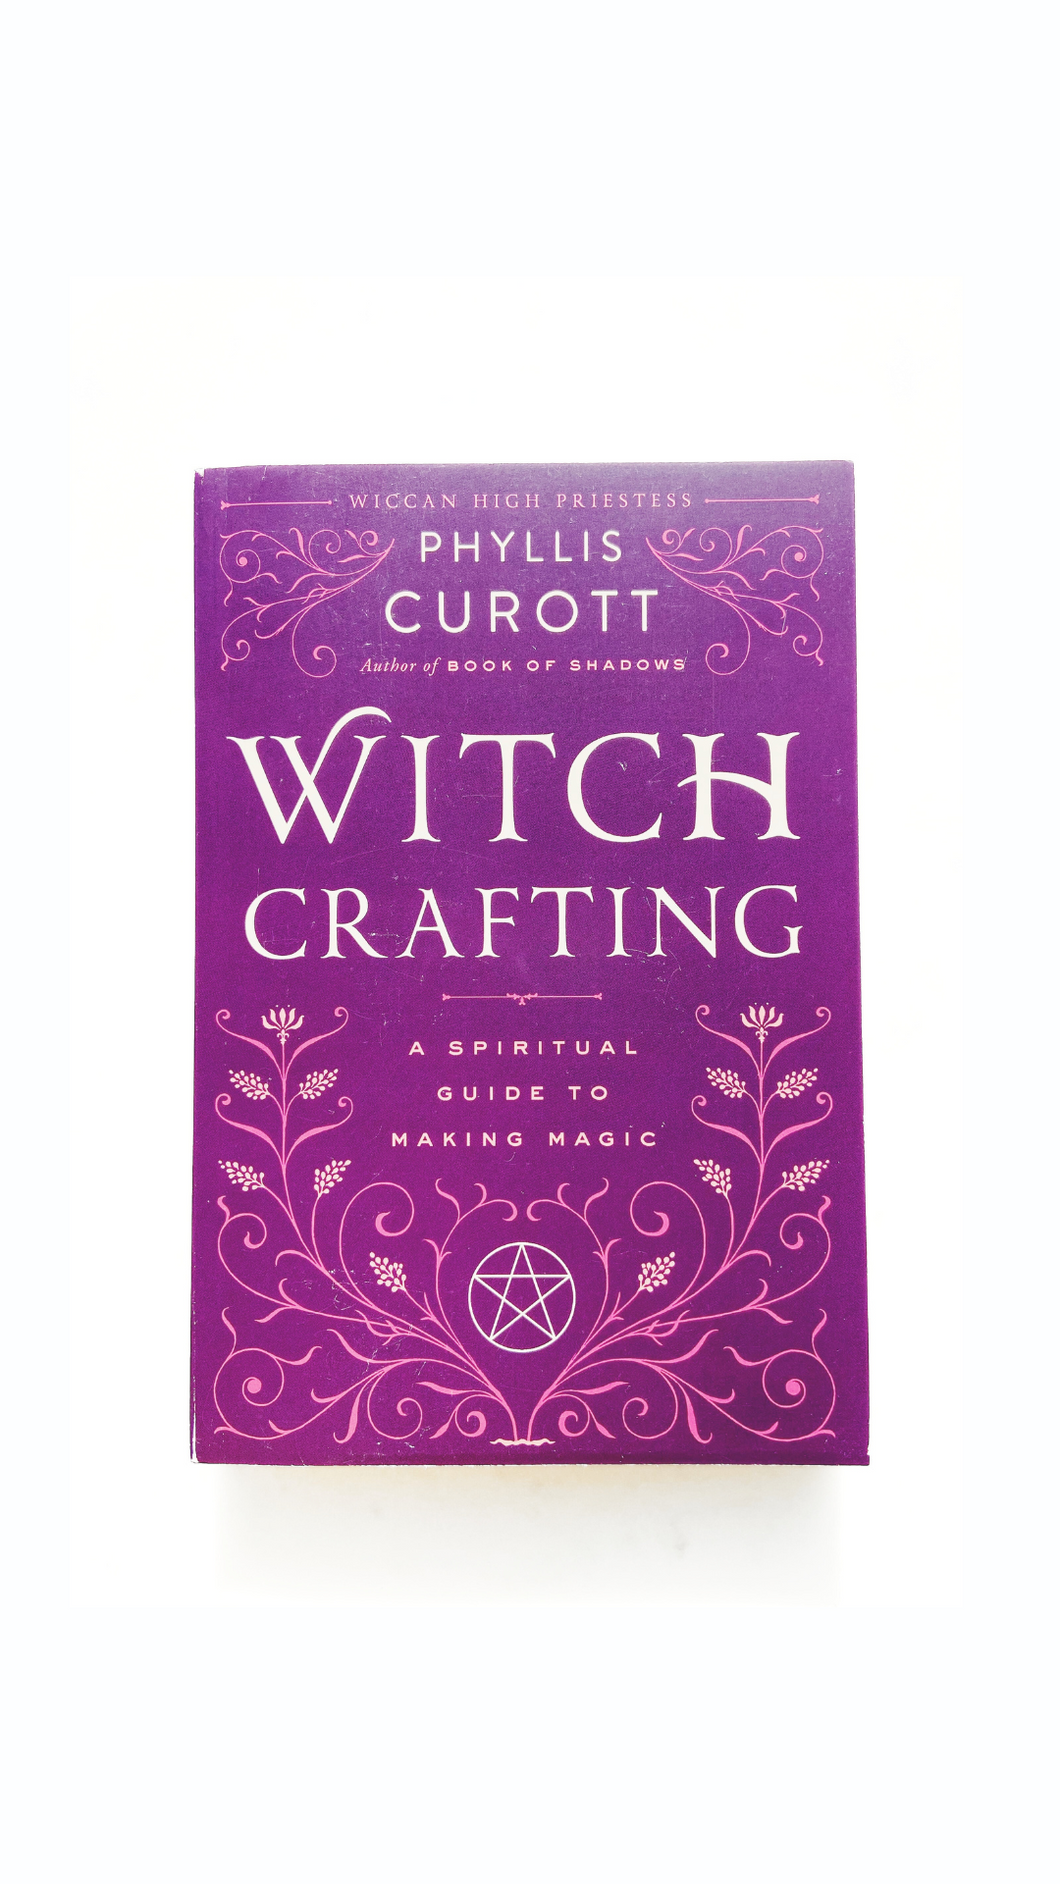 Witchcrafting: A Spiritual Guide to Magic Making